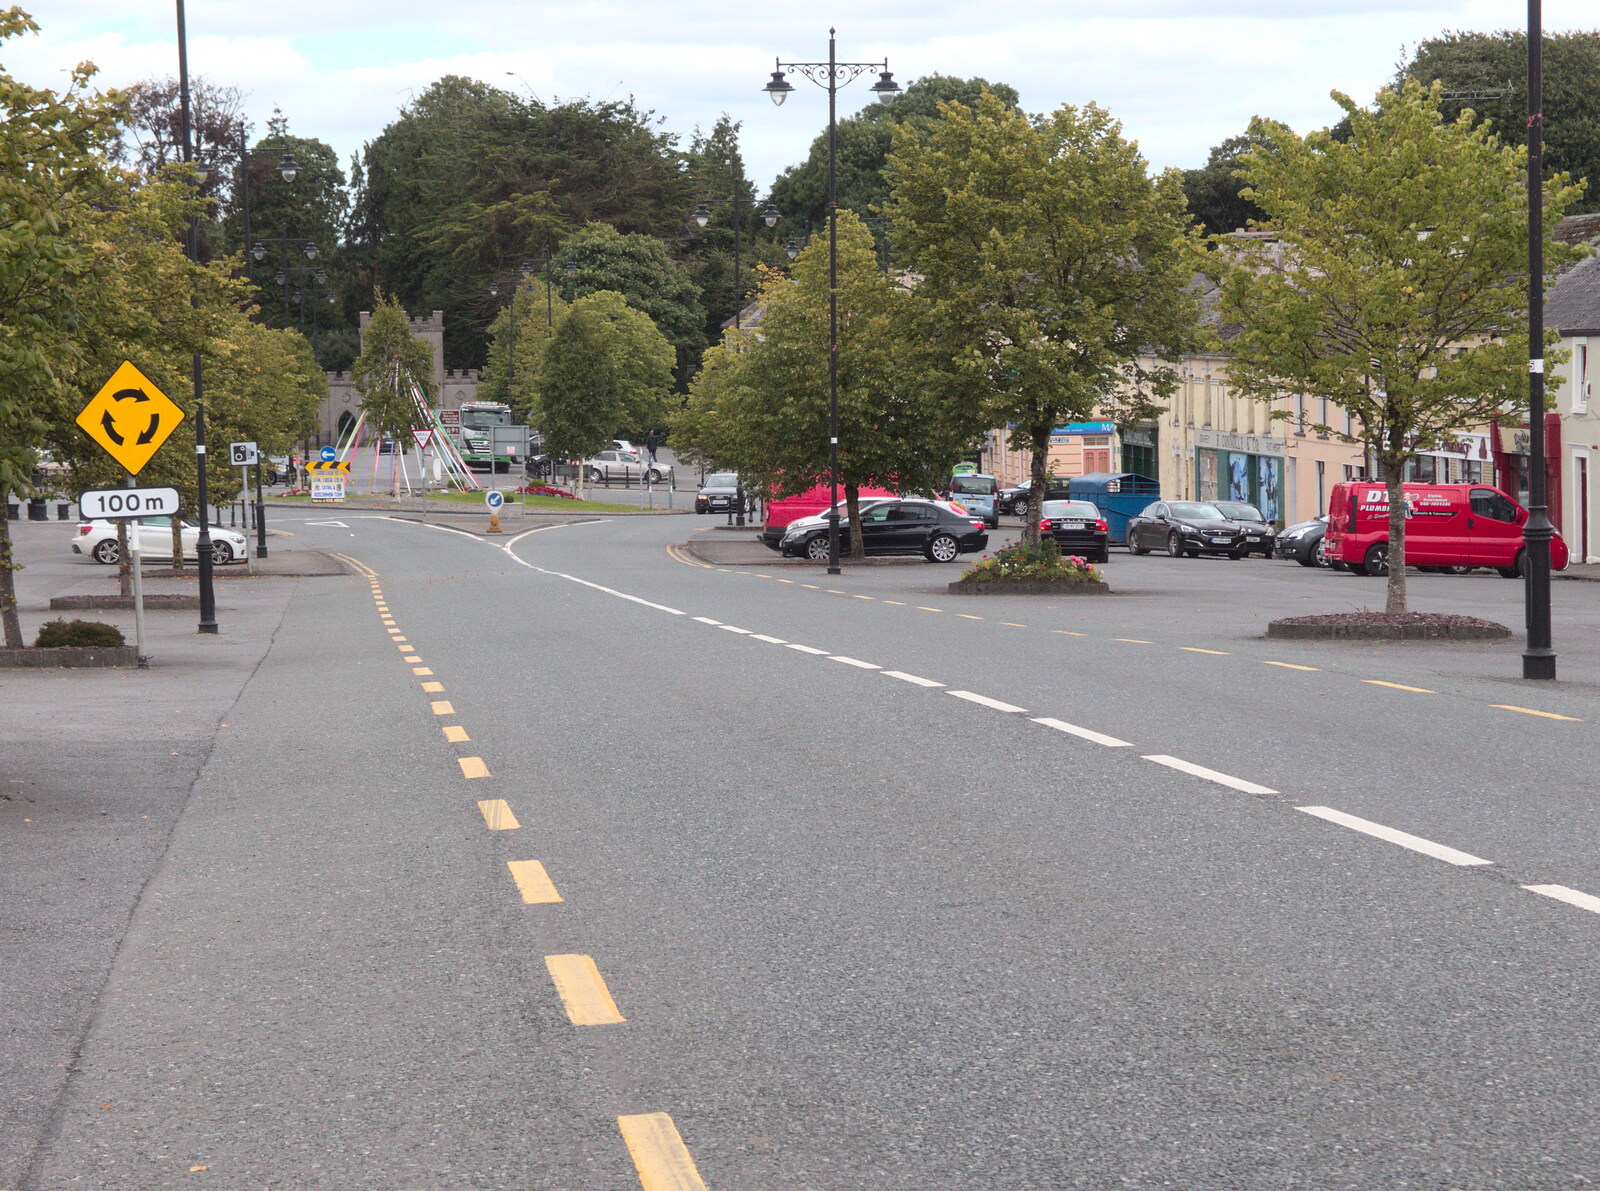 Looking down Church Street to the roundabout from From Achill to Strokestown, Mayo and Roscommon, Ireland - 10th August 2017